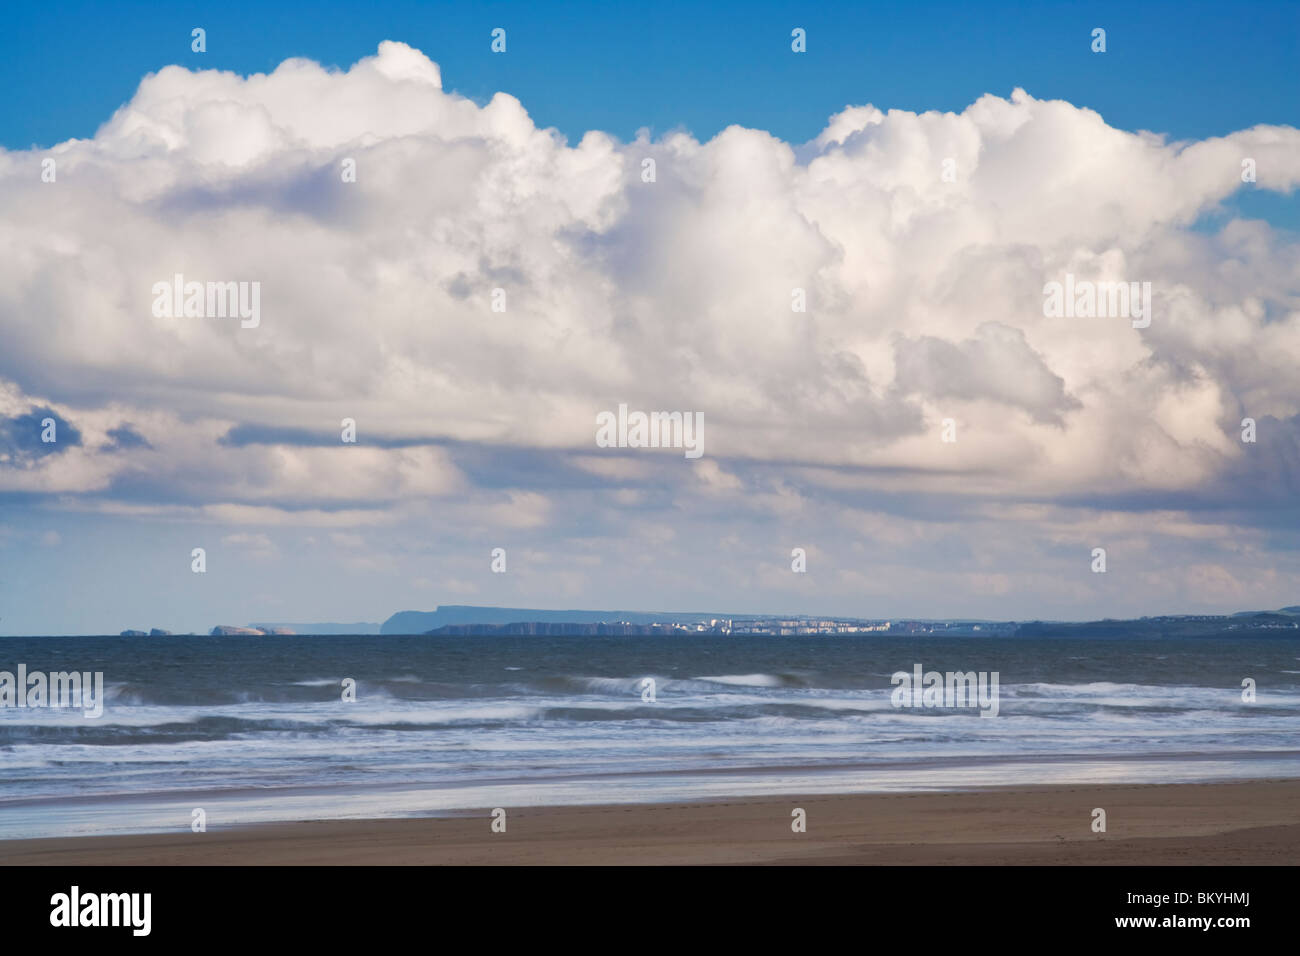 Cumulus clouds gathering over Benone Strand, and on the far horizon, Portstewart, County Down, Northern Ireland Stock Photo